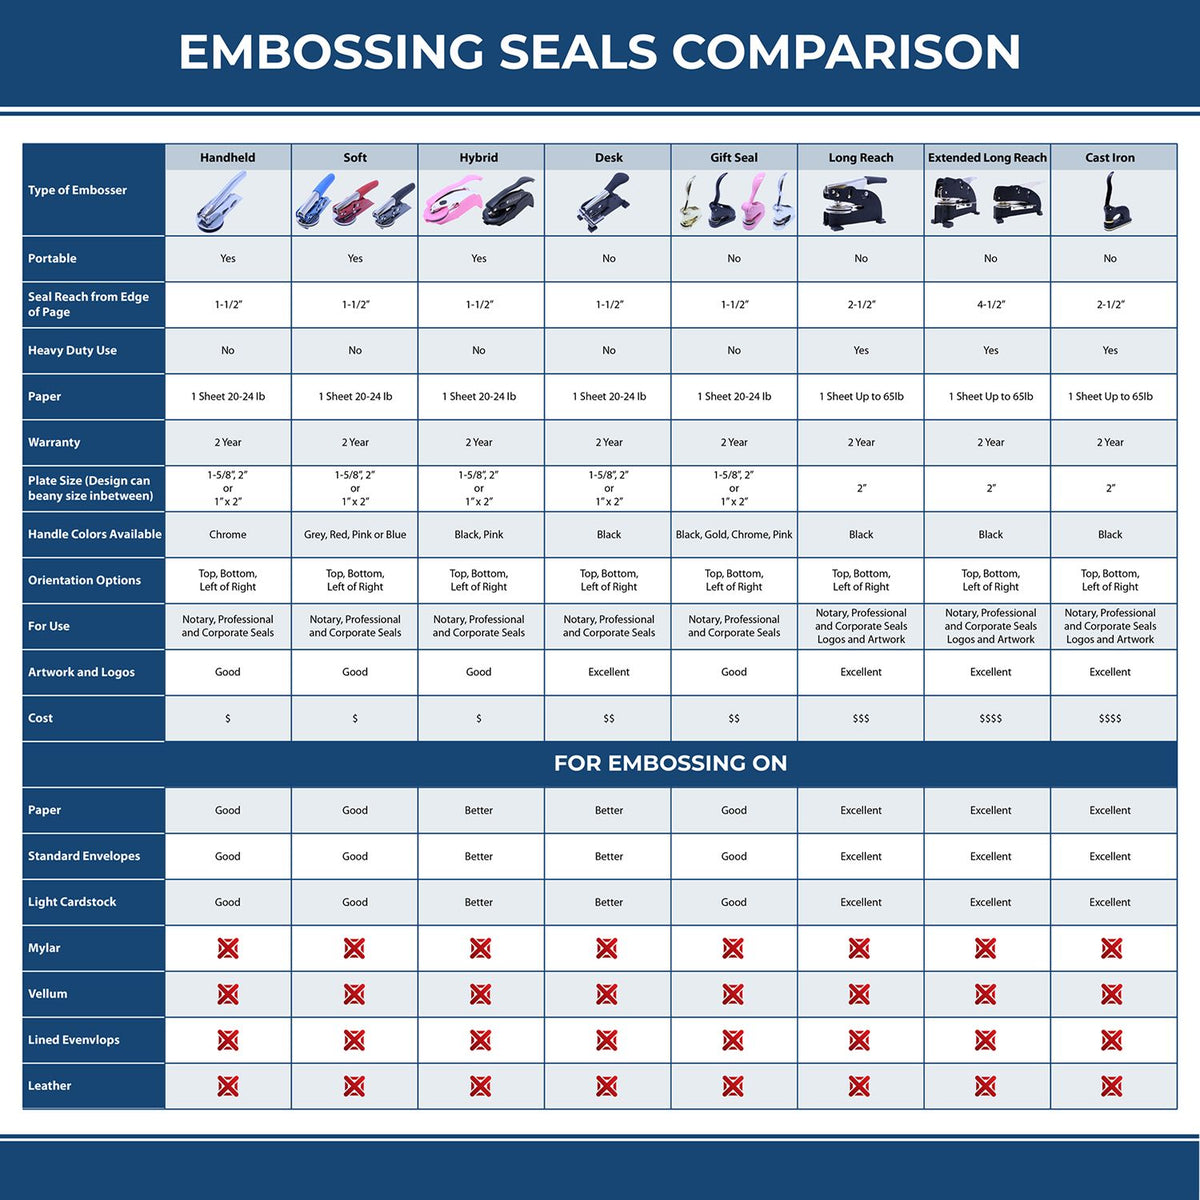 A comparison chart for the different types of mount models available for the Hybrid Tennessee Architect Seal